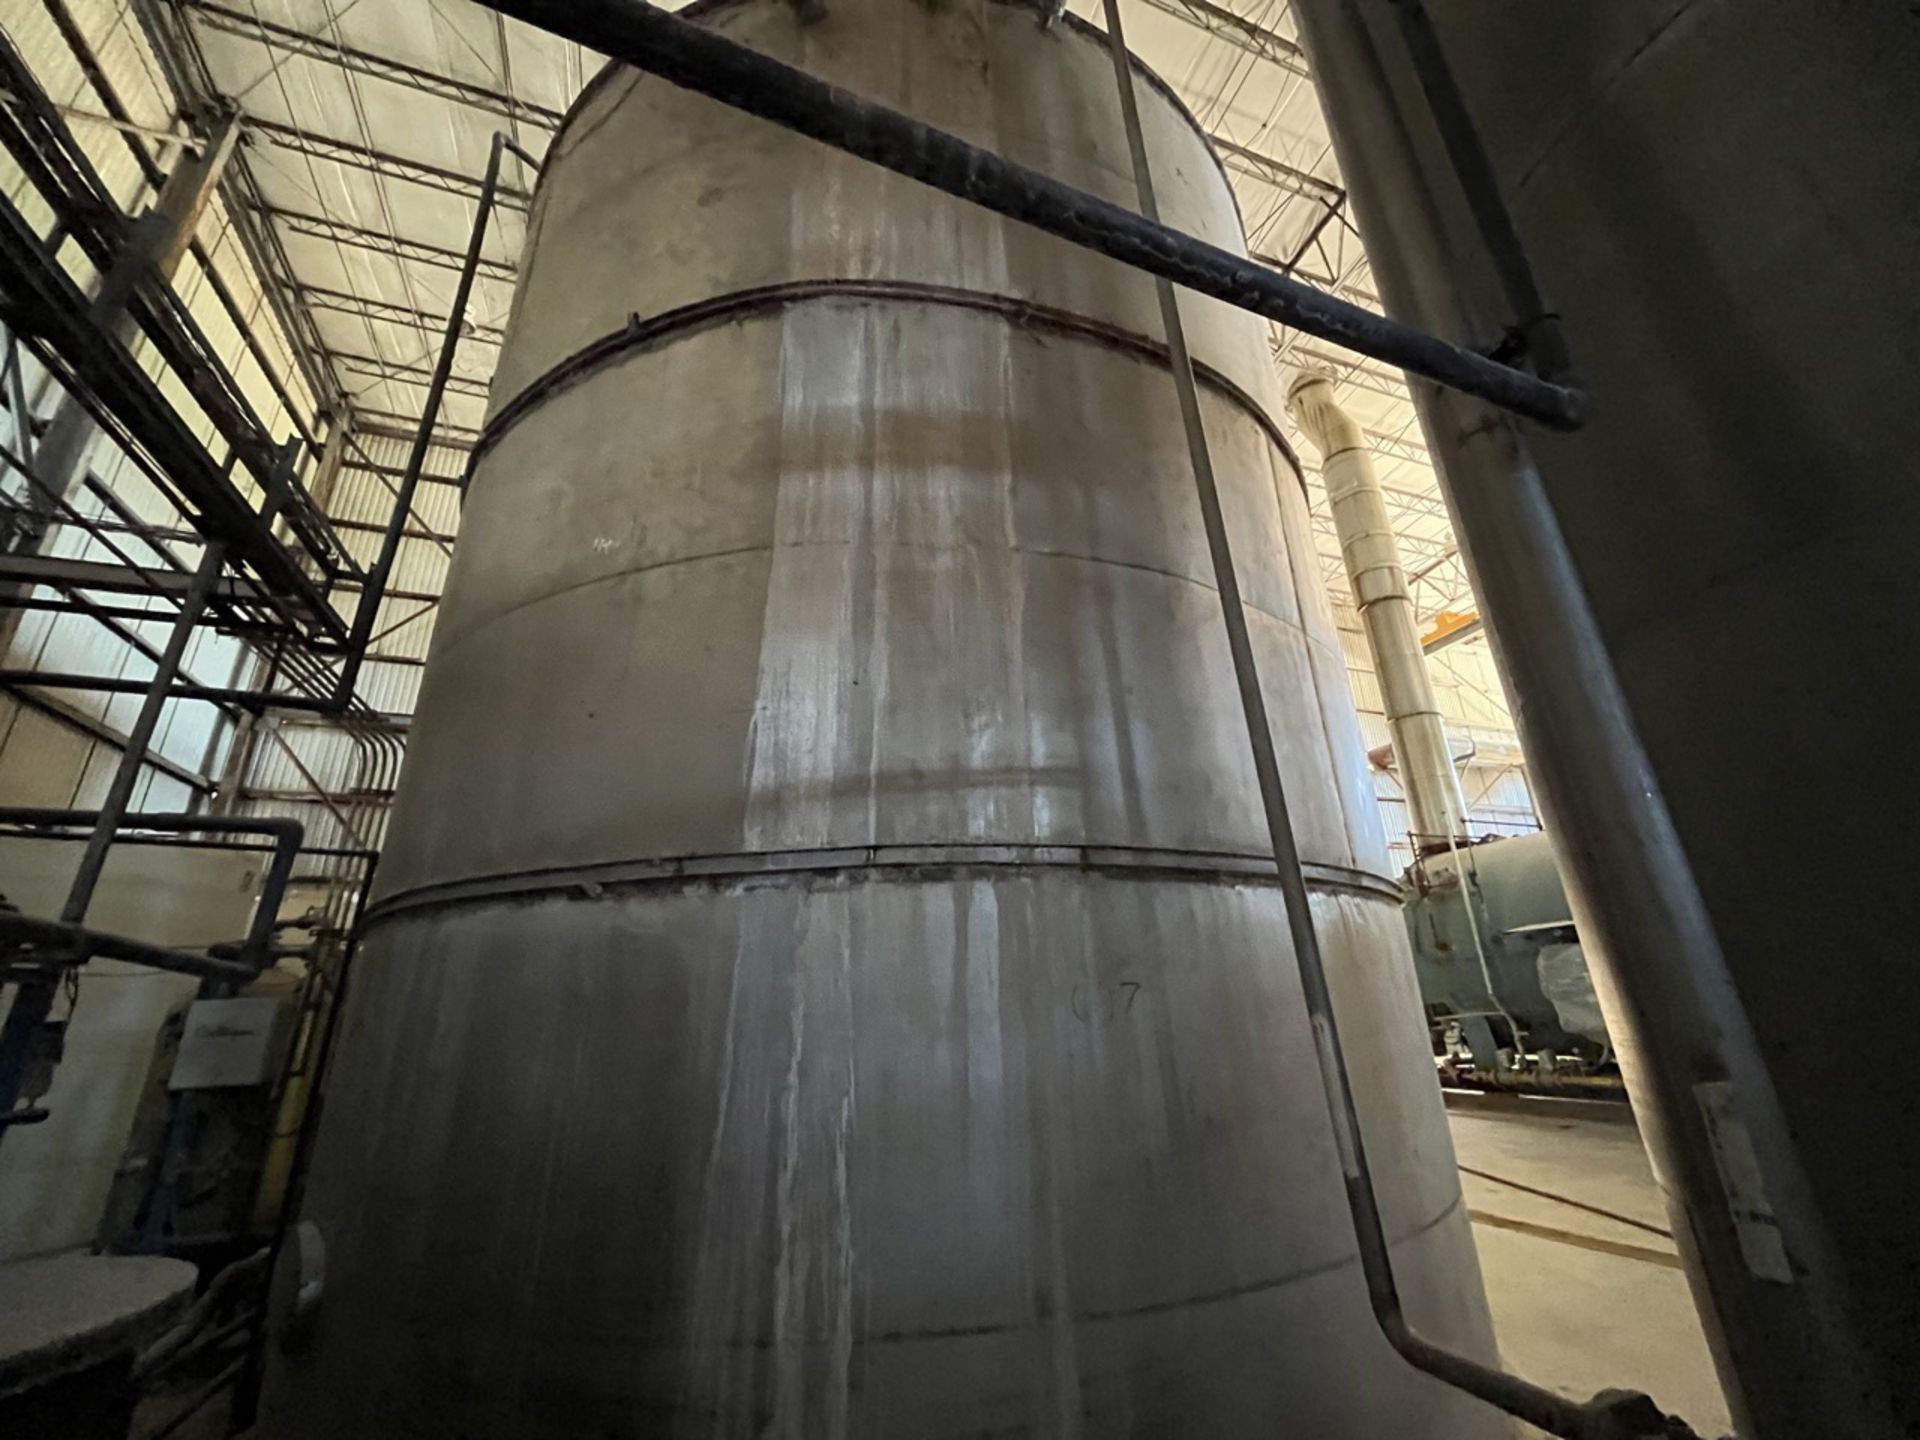 Stainless steel storage tank with a capacity of 192,163 liters, measuring approximately 6 meters in - Image 6 of 9